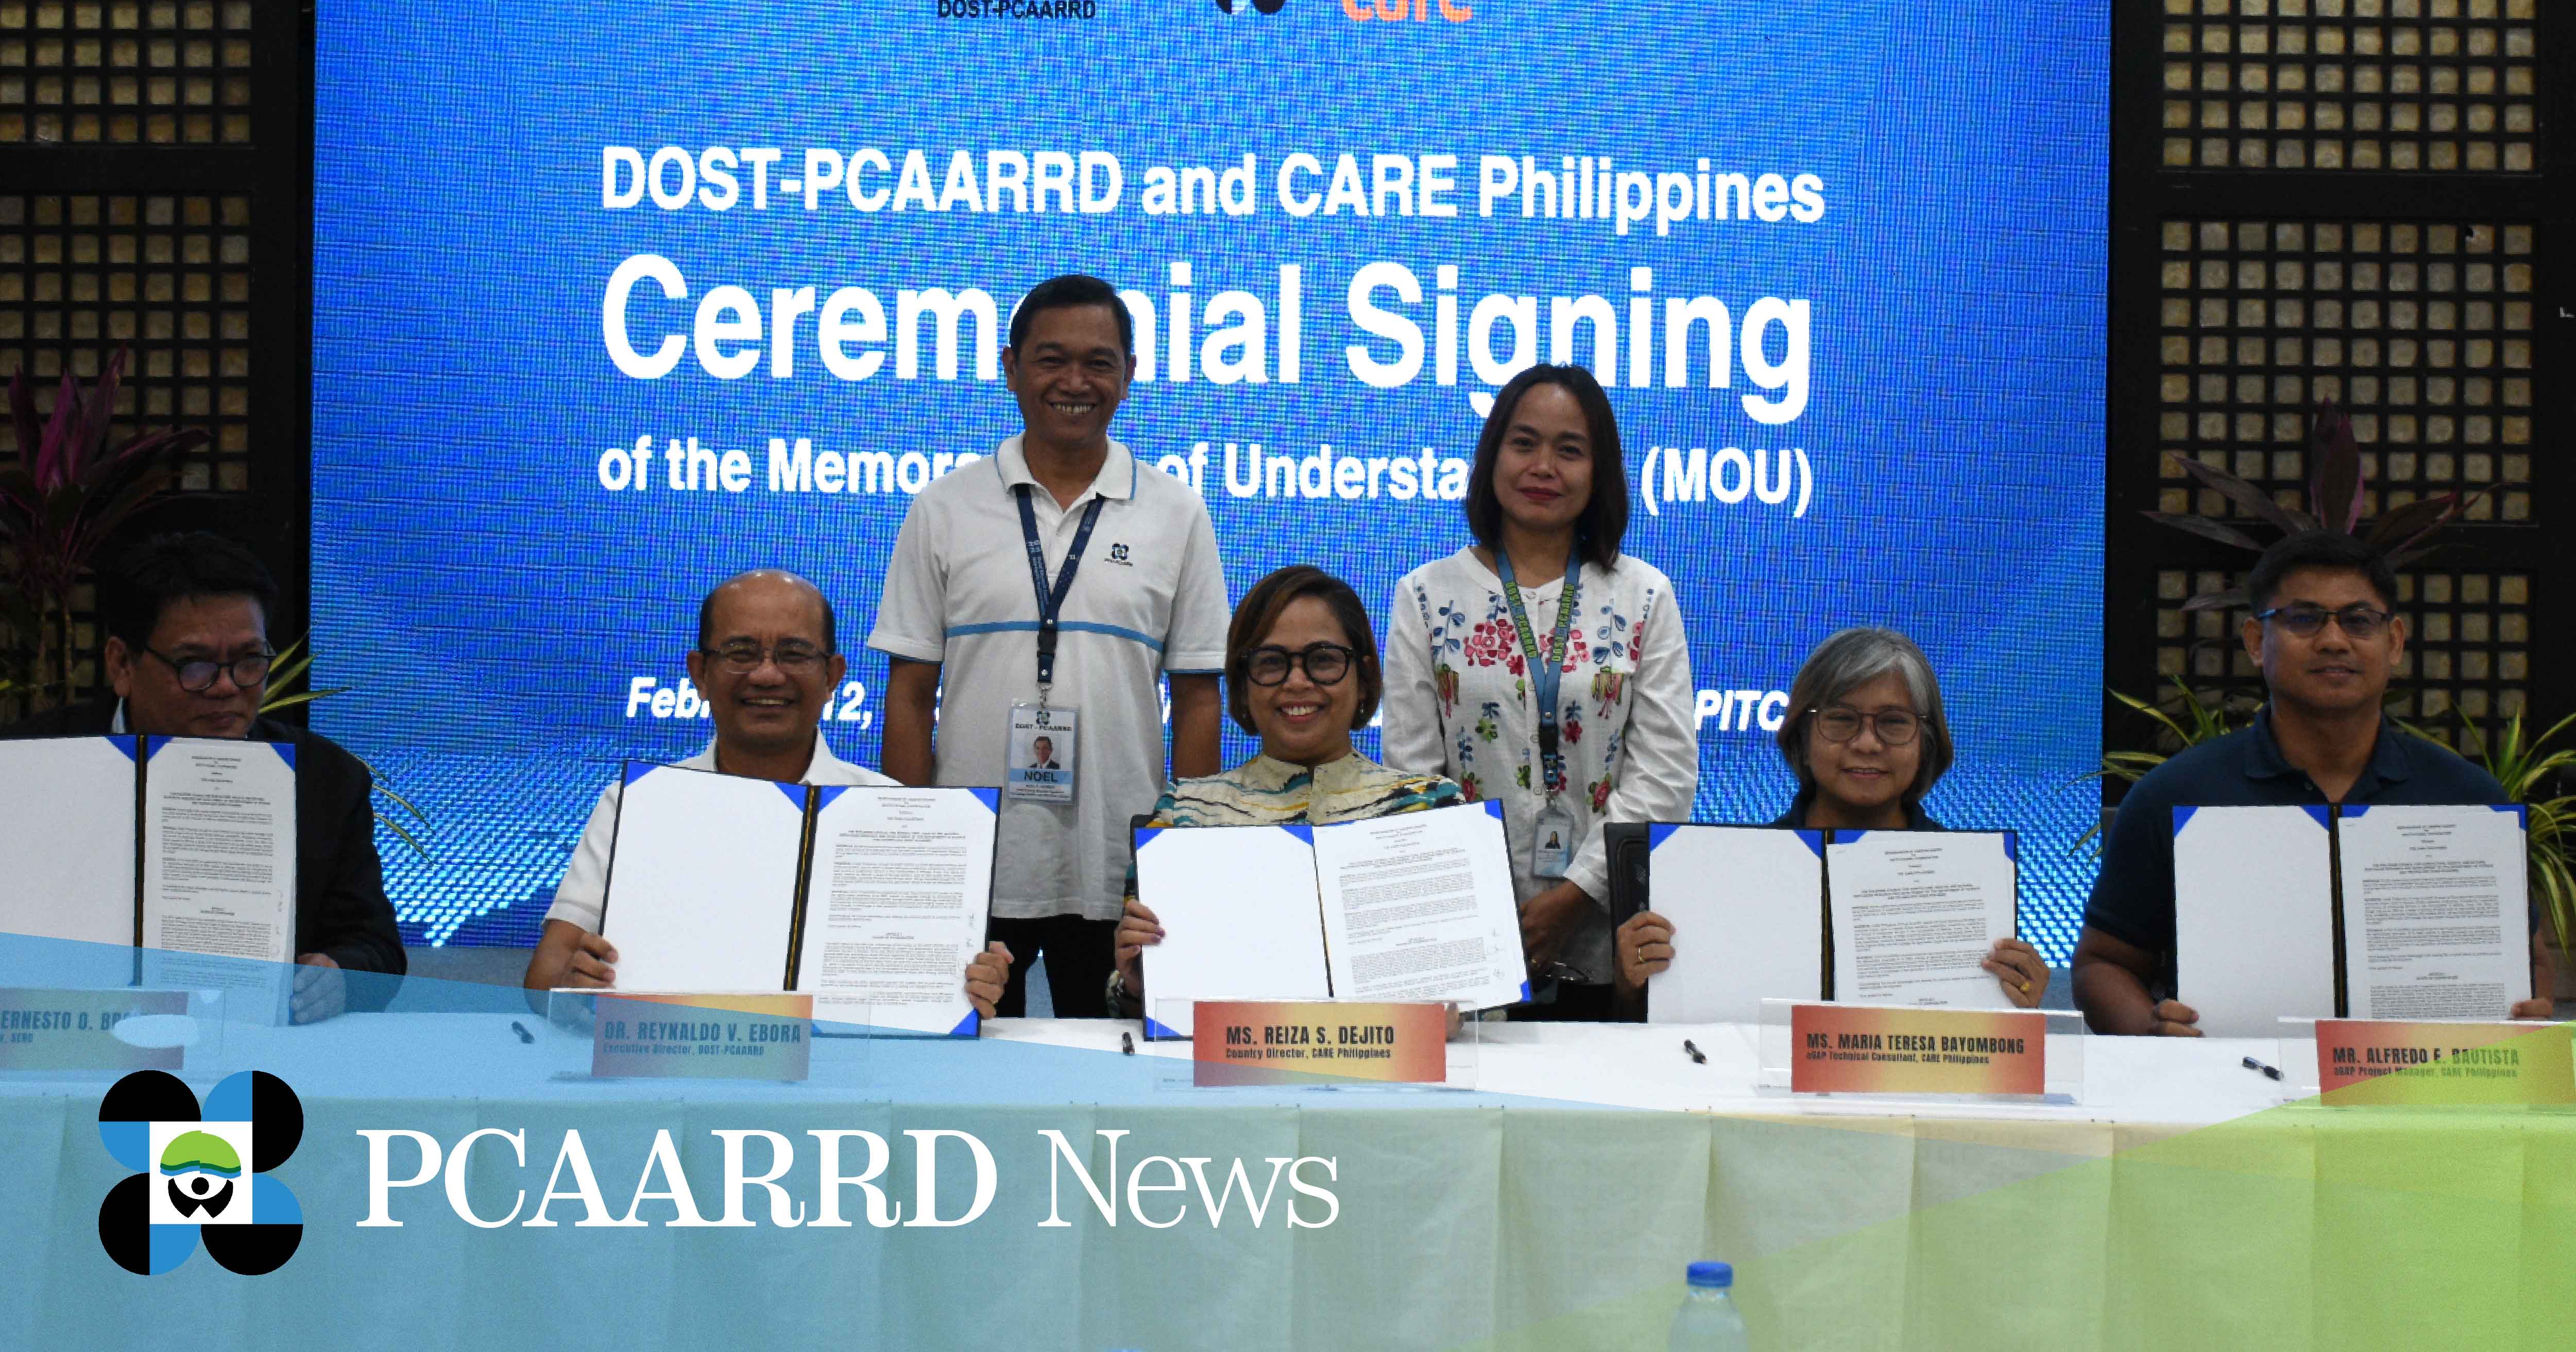 DOST-PCAARRD and CARE Philippines forge partnership to empower smallholder vegetable farmers